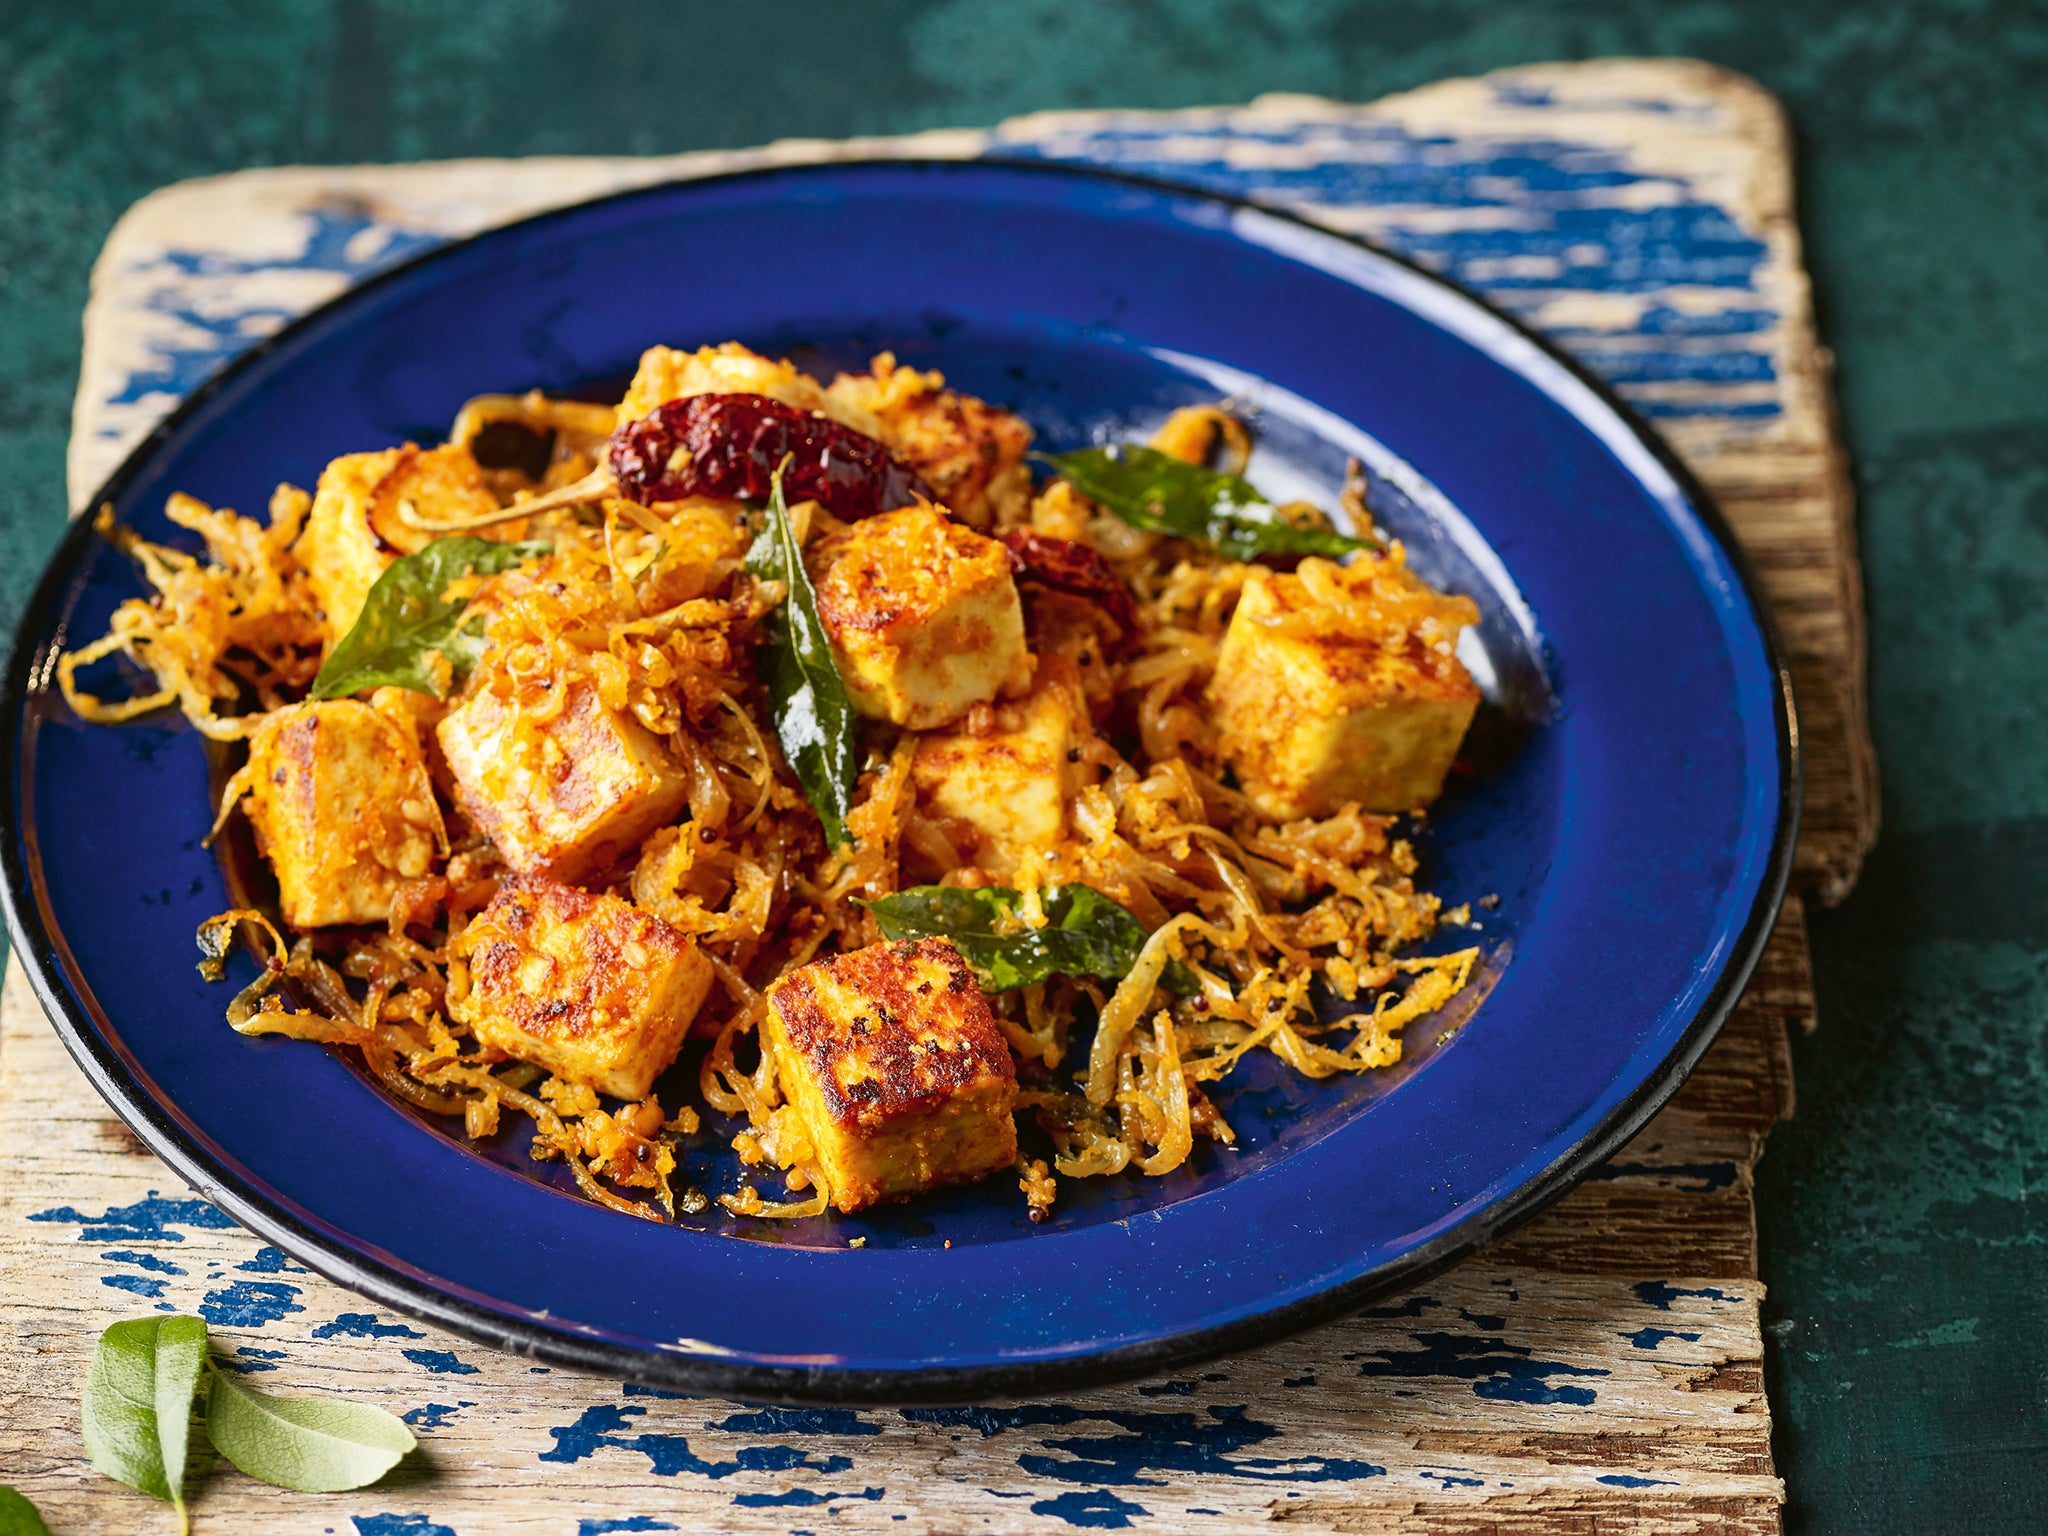 ‘The coconut paneer tikka – you cannot stop eating it,’ says Makan